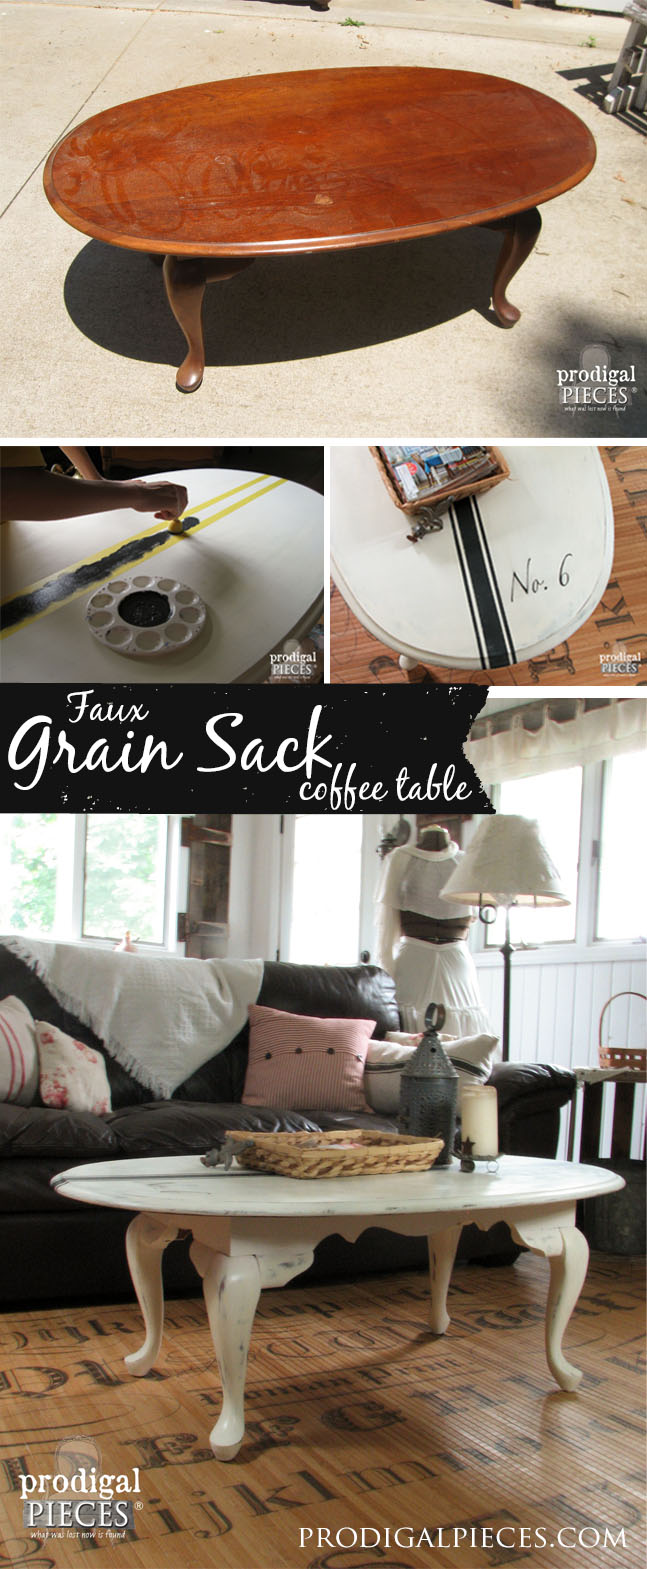 Create a Faux French Grain Sack Table with Tape and Paint - Let a teenager show you how! by Prodigal Pieces | prodigalpieces.com #prodigalpieces